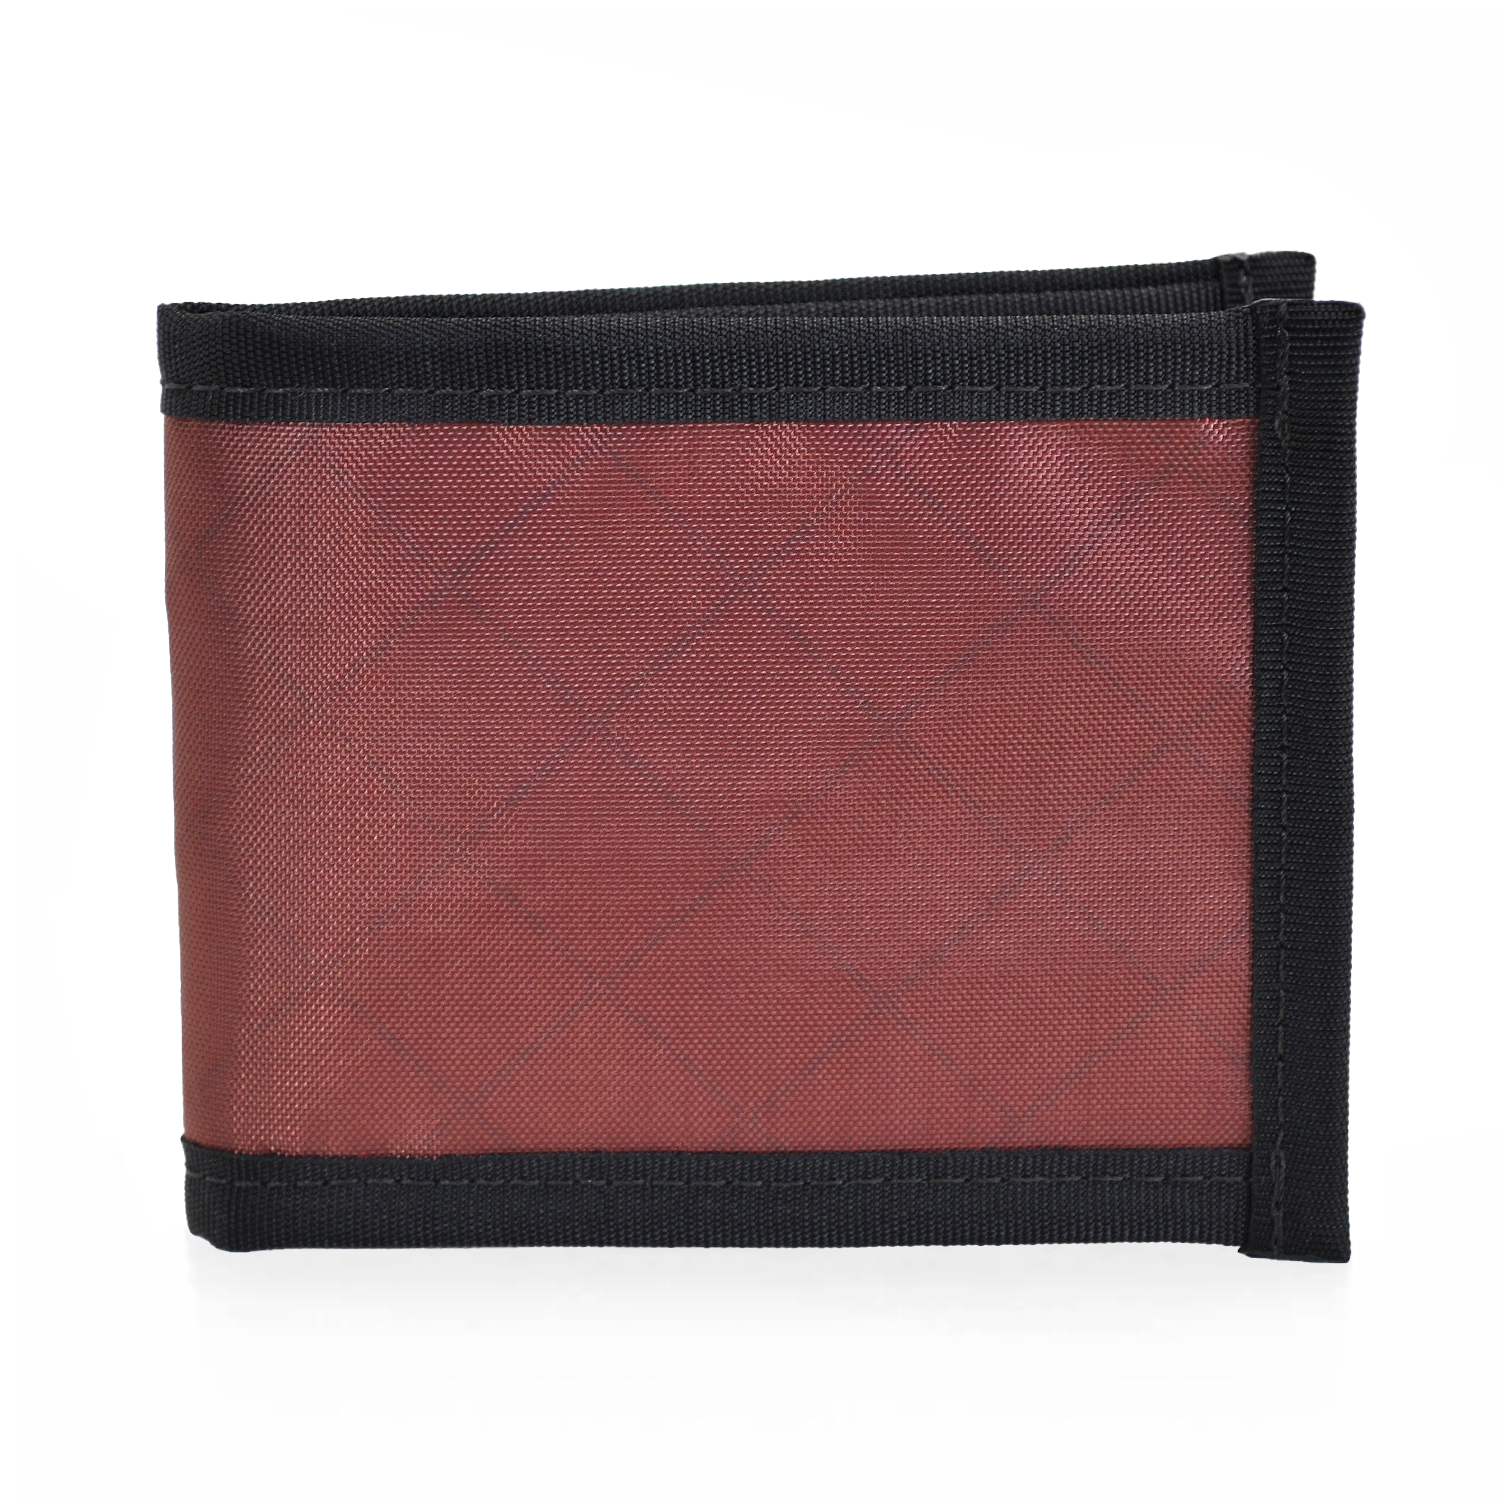 Flowfold Vanguard Bifold Wallet Made in USA, Maine by Flowfold of Recycled Polyester EcoPak Fabric, Red Barn